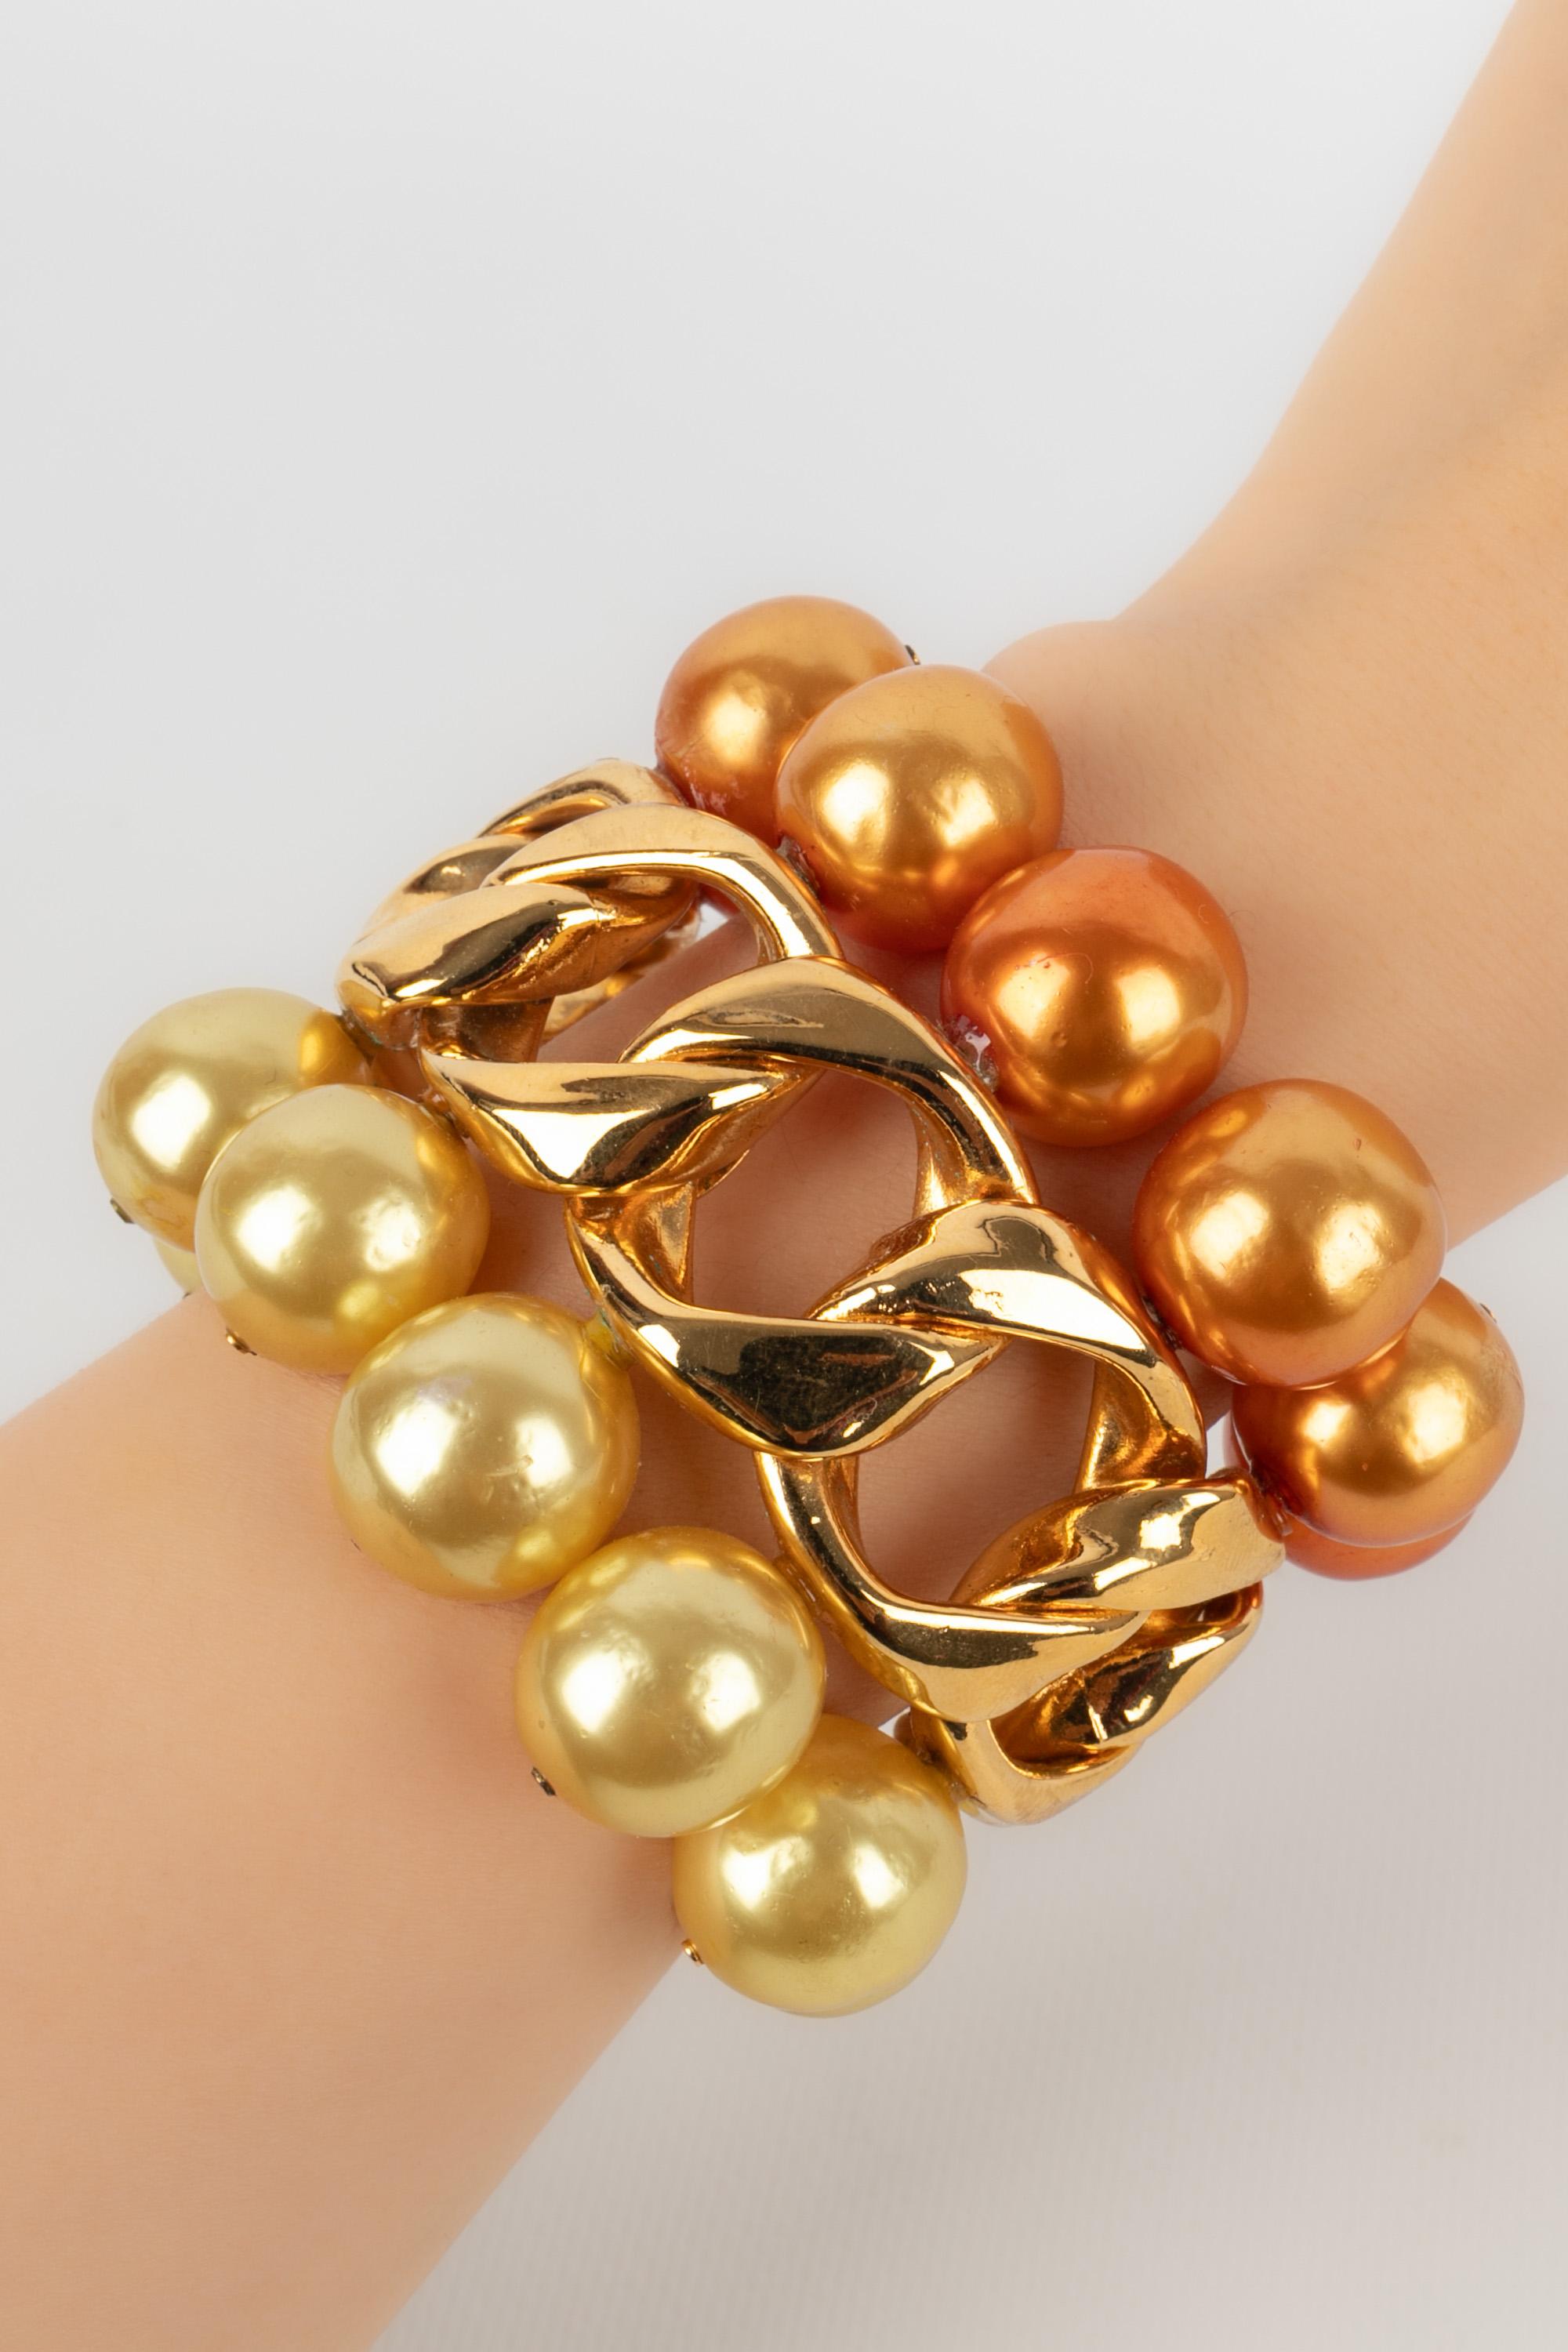 CHANEL - (Made in France) Golden metal cuff bracelet ornamented with yellow and orange costume pearls. 2cc5 Collection - 1991 Collection.

Condition:
Very good condition

Dimensions:
Wrist circumference: 15 cm - Opening: 3 cm - Length: 7 cm

BRAB157
